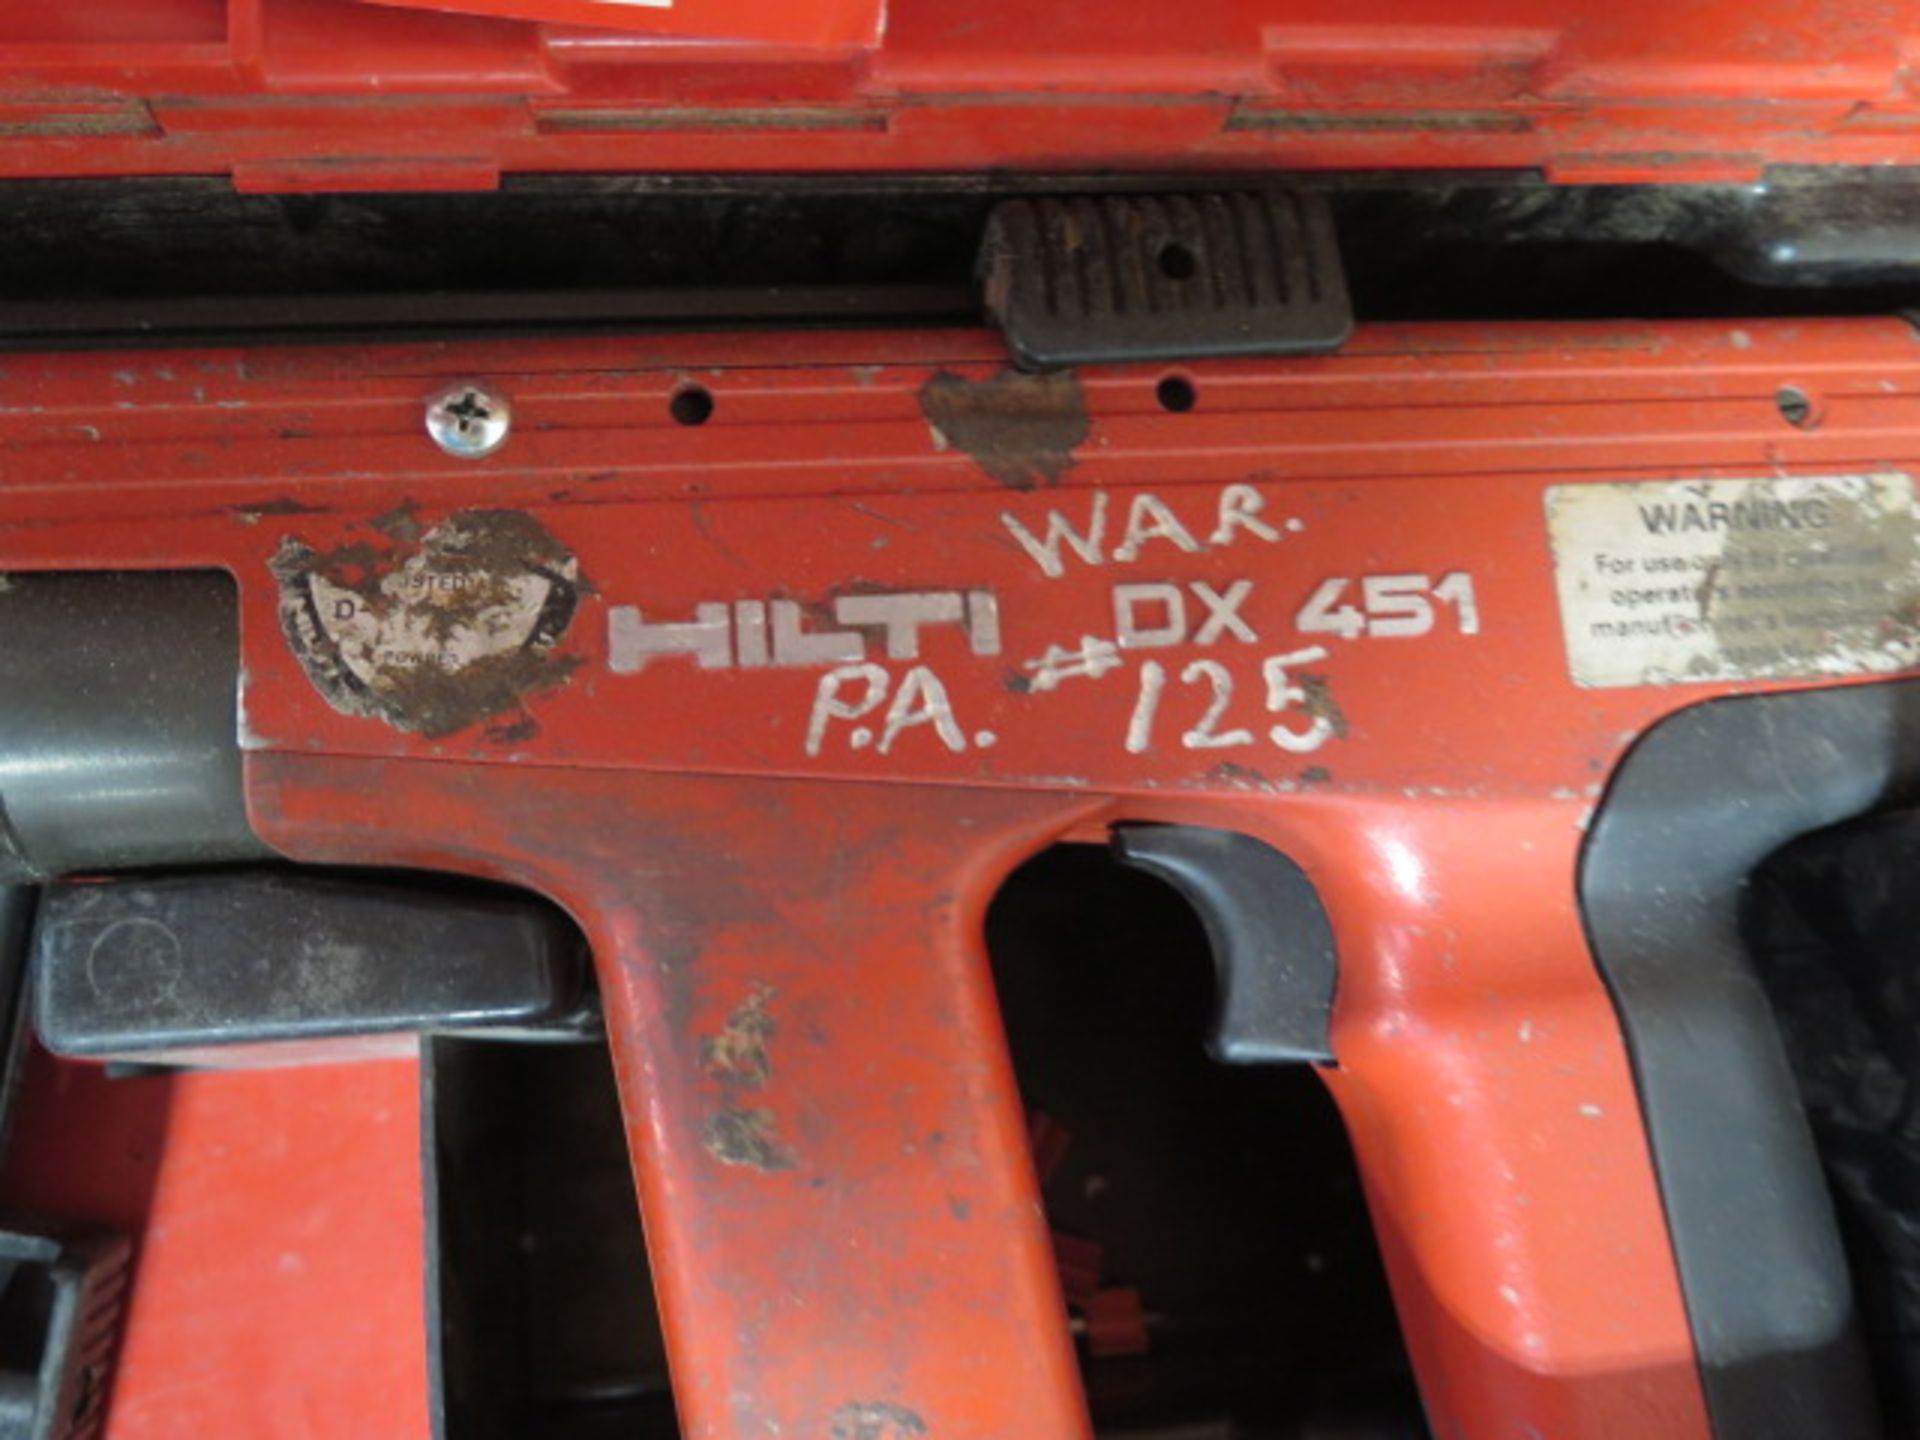 Hilti DX451 Powder Shot Tool (SOLD AS-IS - NO WARRANTY) - Image 4 of 4